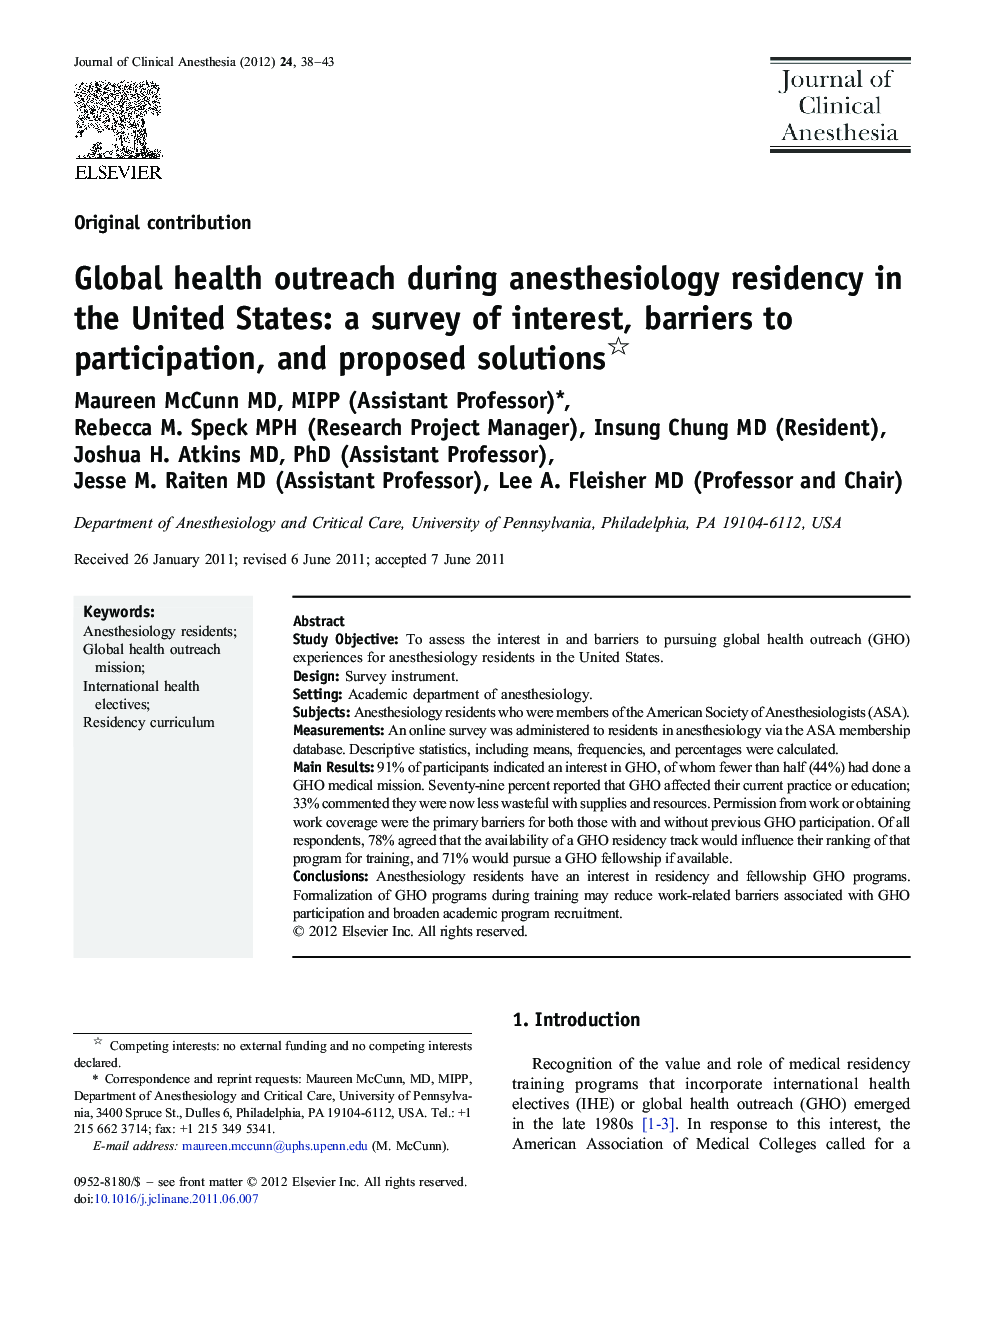 Global health outreach during anesthesiology residency in the United States: a survey of interest, barriers to participation, and proposed solutions 